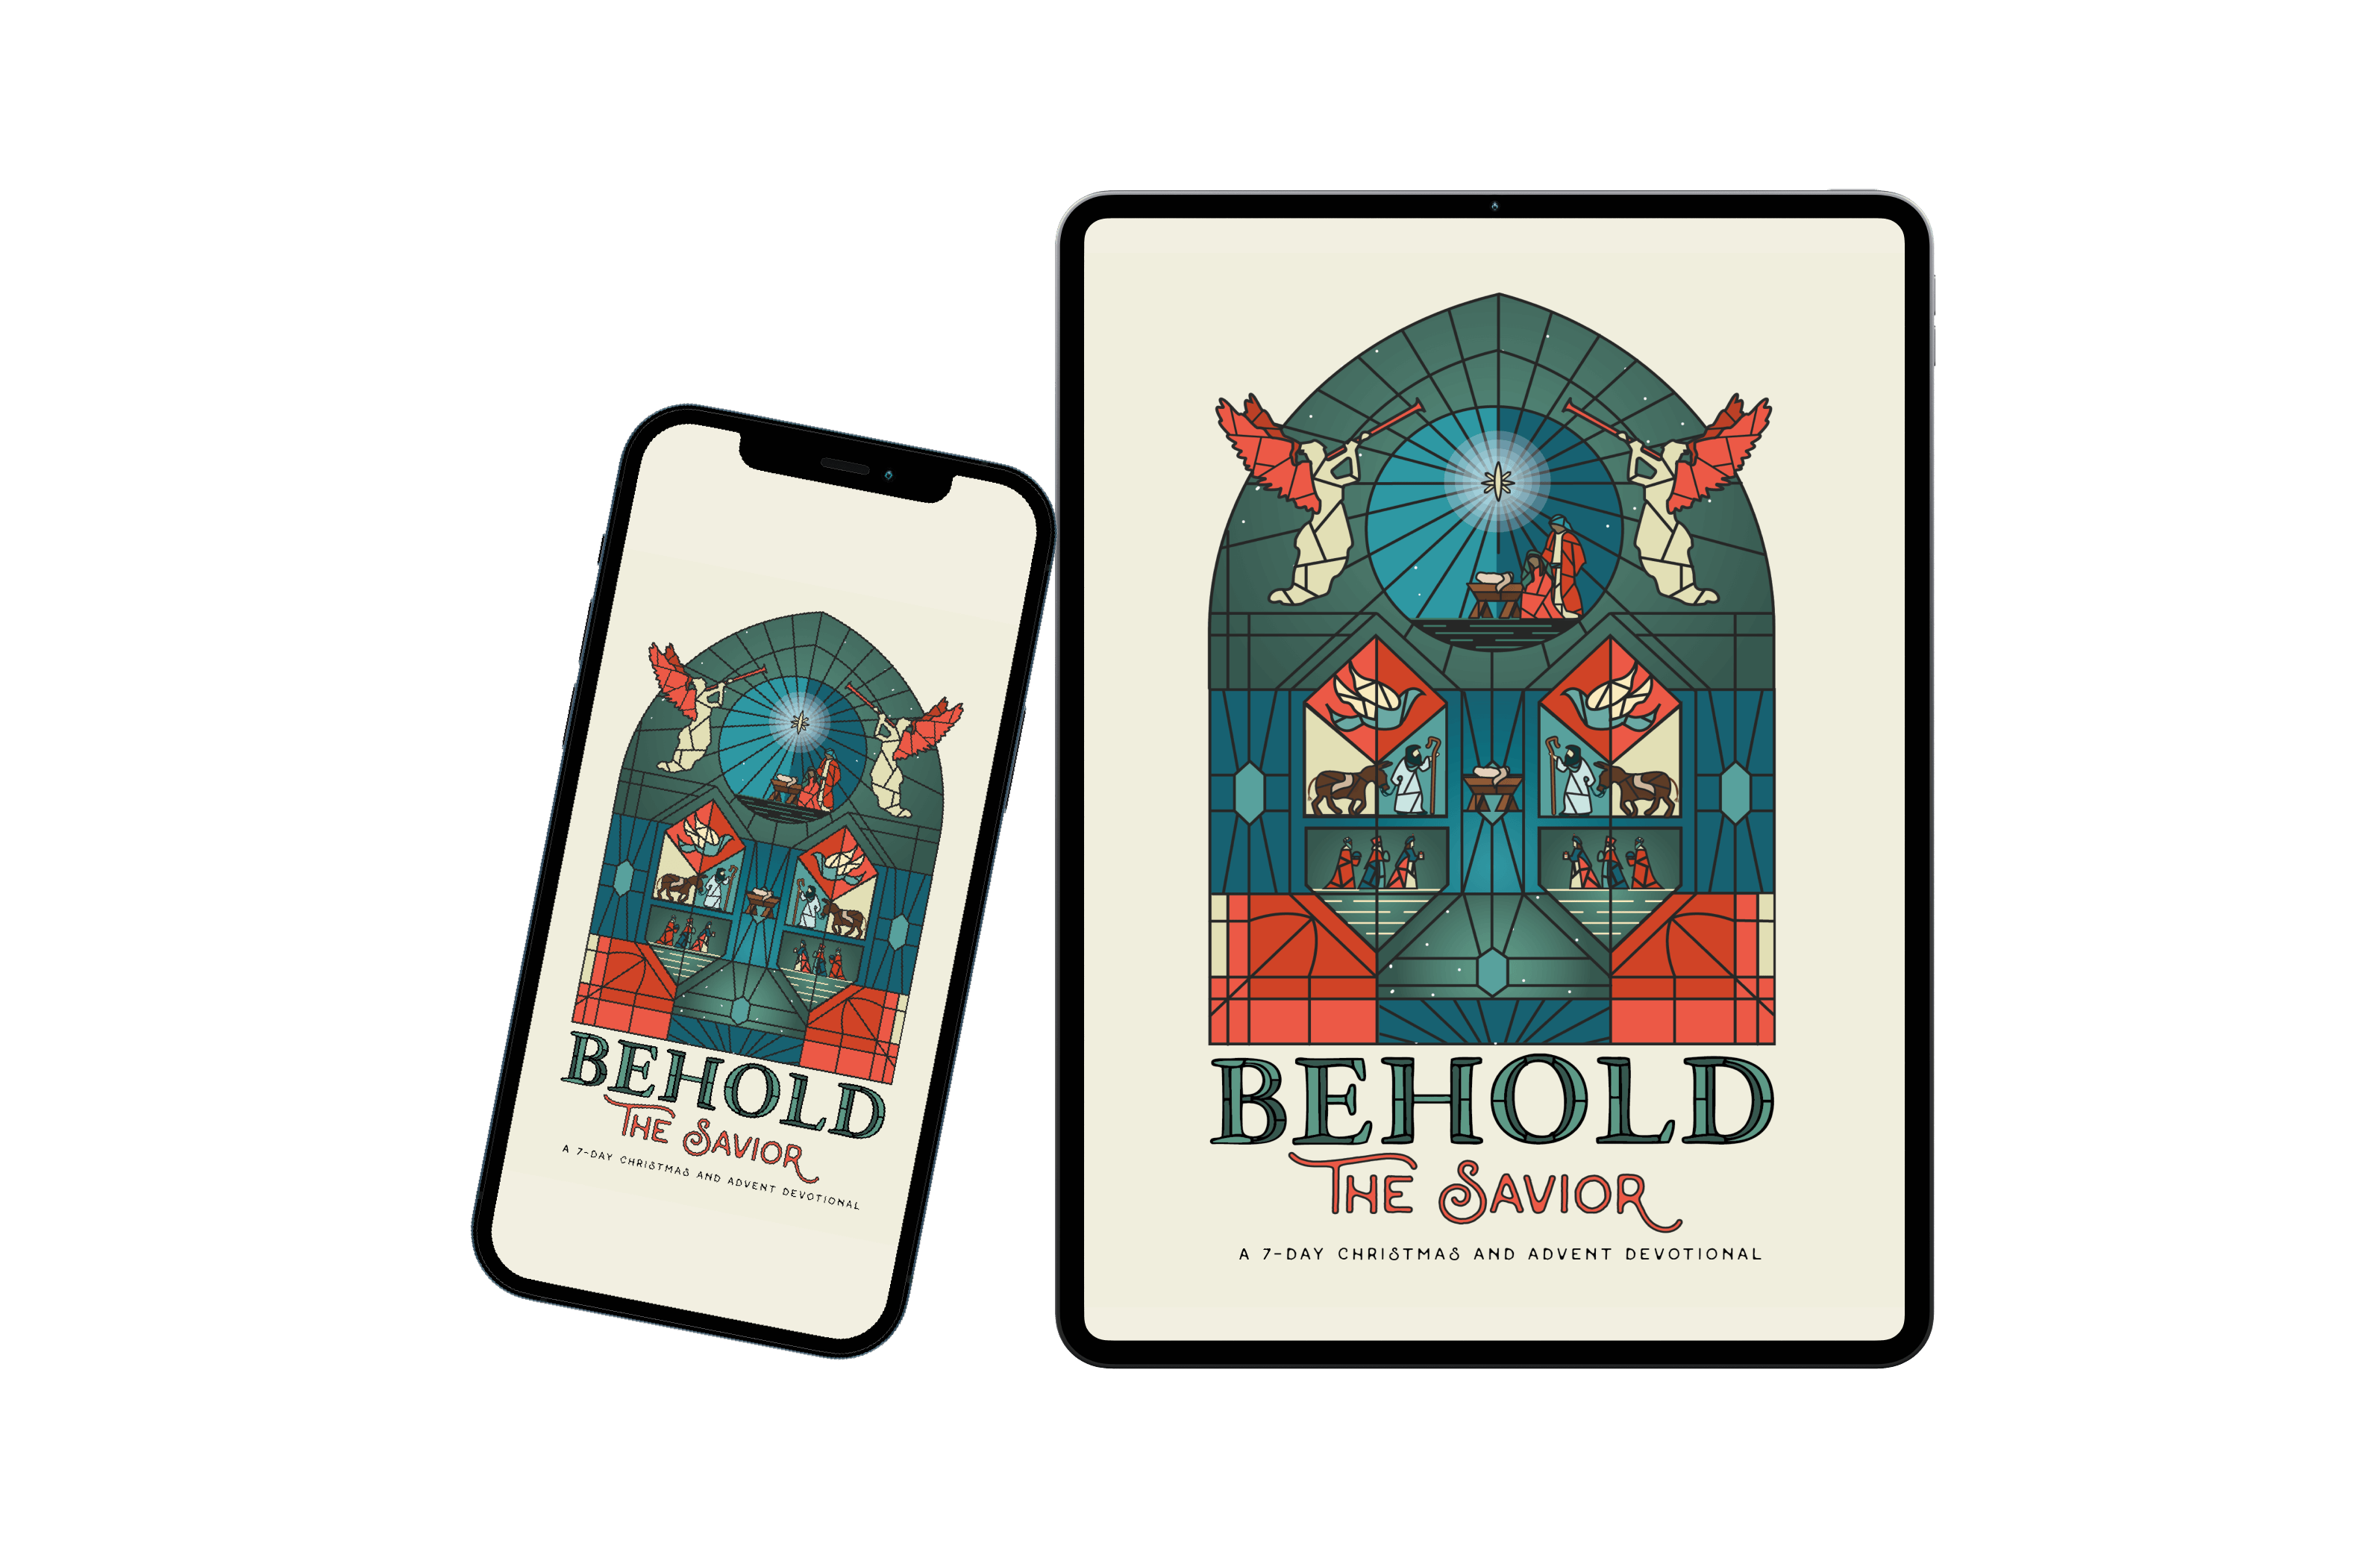 [DOWNLOADABLE VERSION] Behold the Savior: A 7-Day Christmas and Advent Devotional